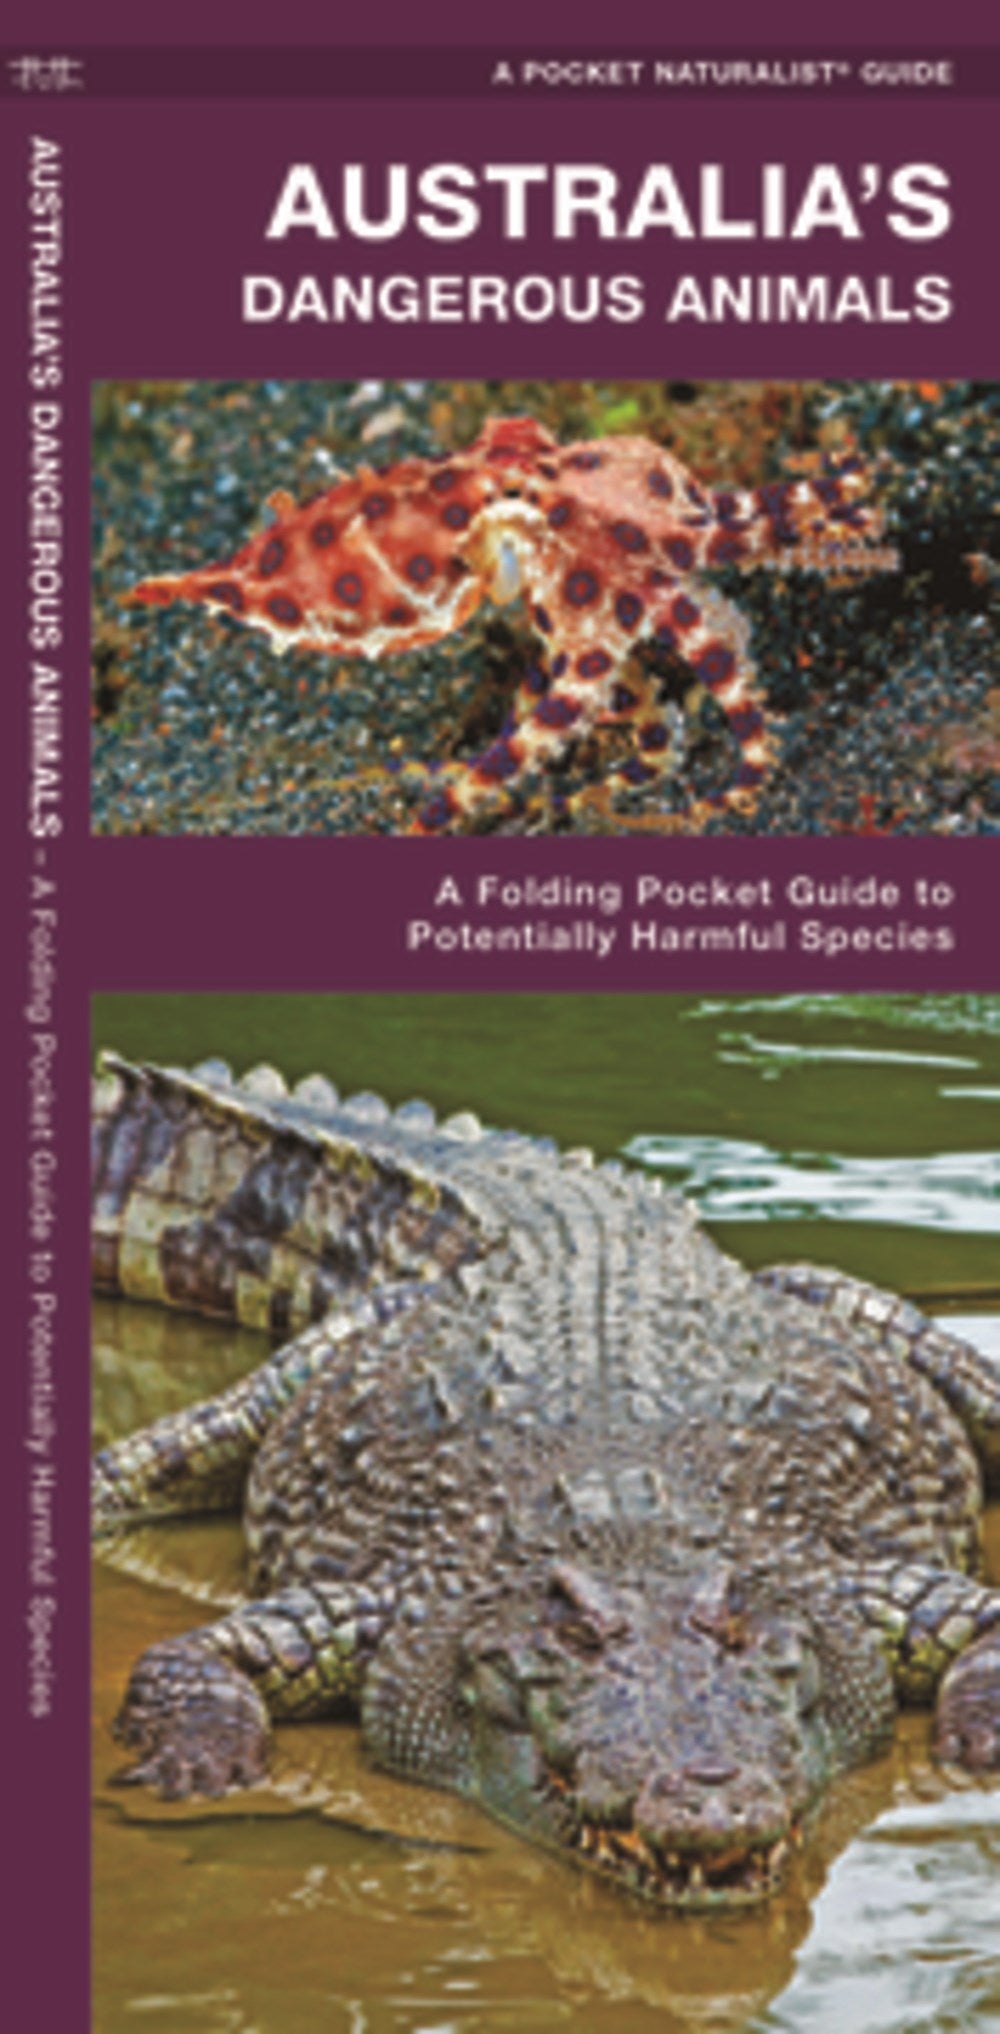 Australia's Dangerous Animals: A Folding Pocket Guide to Potentially Harmful Species